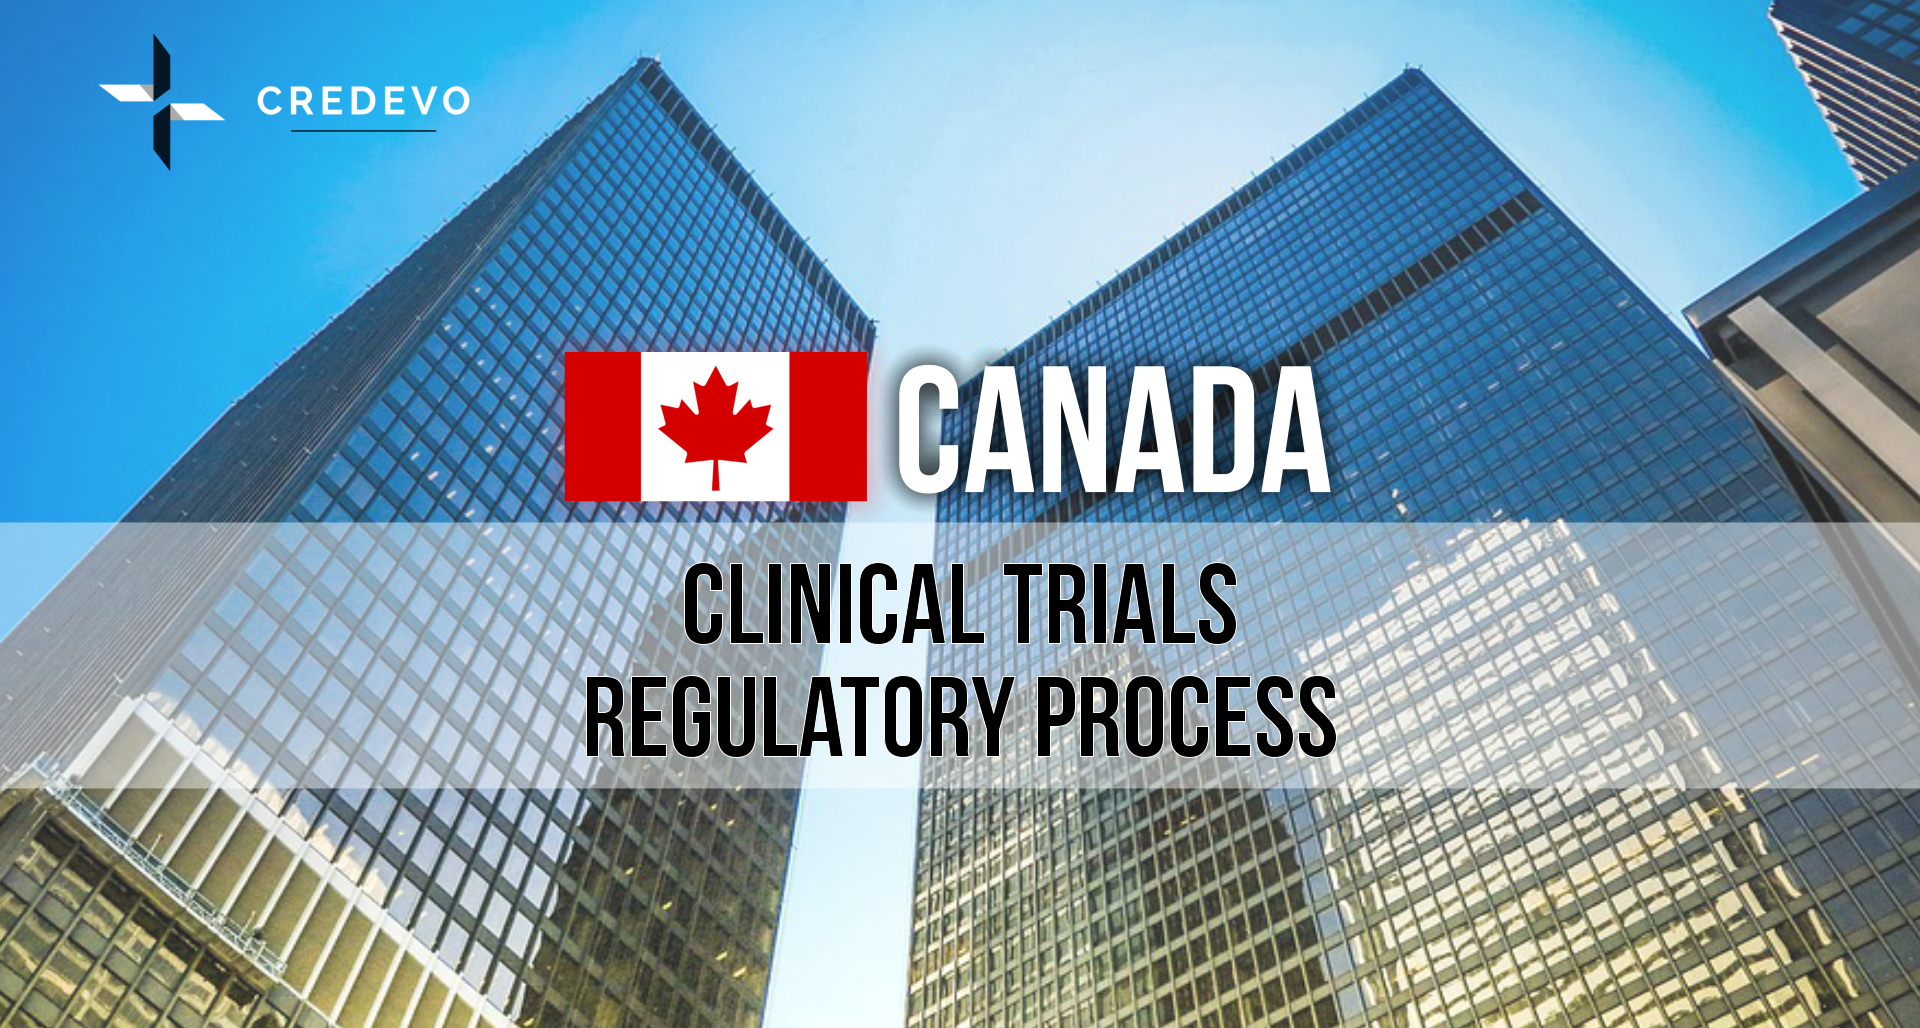 clinical research sites in canada